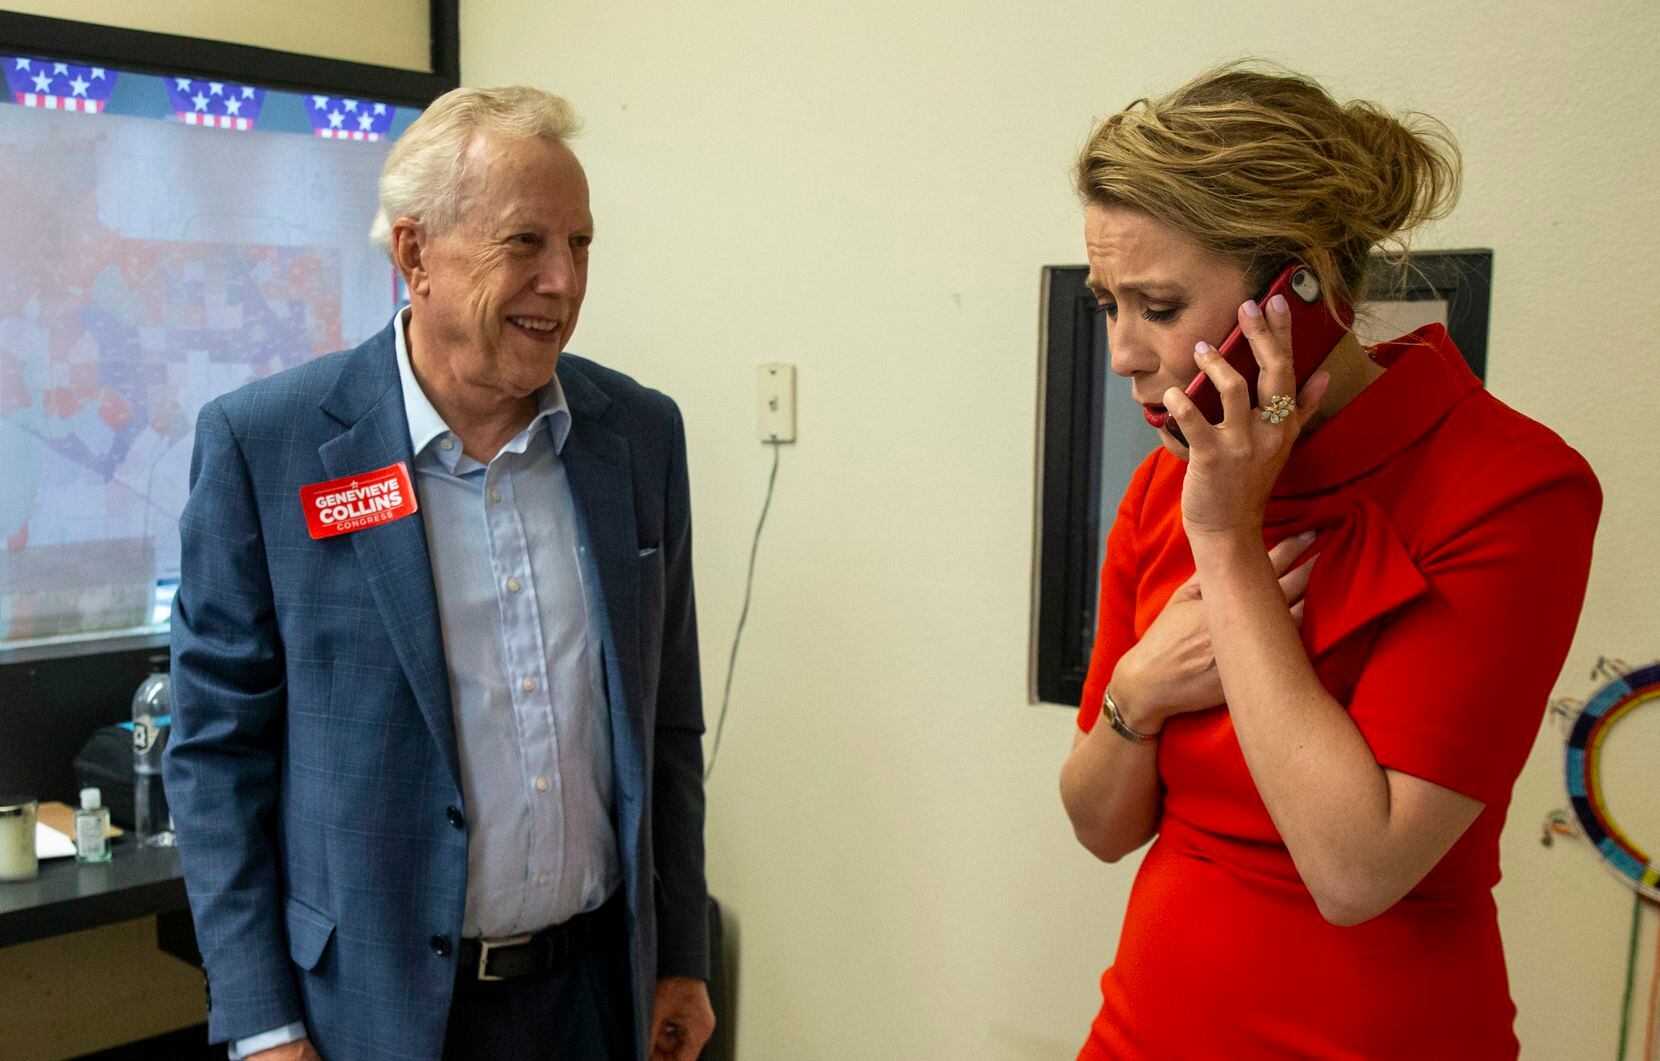 District 32 congressional candidate Genevieve Collins (right) takes a congratulatory phone call from Lt. Governor Dan Patrick alongside her father, Dick Collins, during an election watch party at Collins' campaign headquarters in Dallas on Tuesday, March 3, 2020. Collins is running in the GOP primary against Floyd McLendon and others.